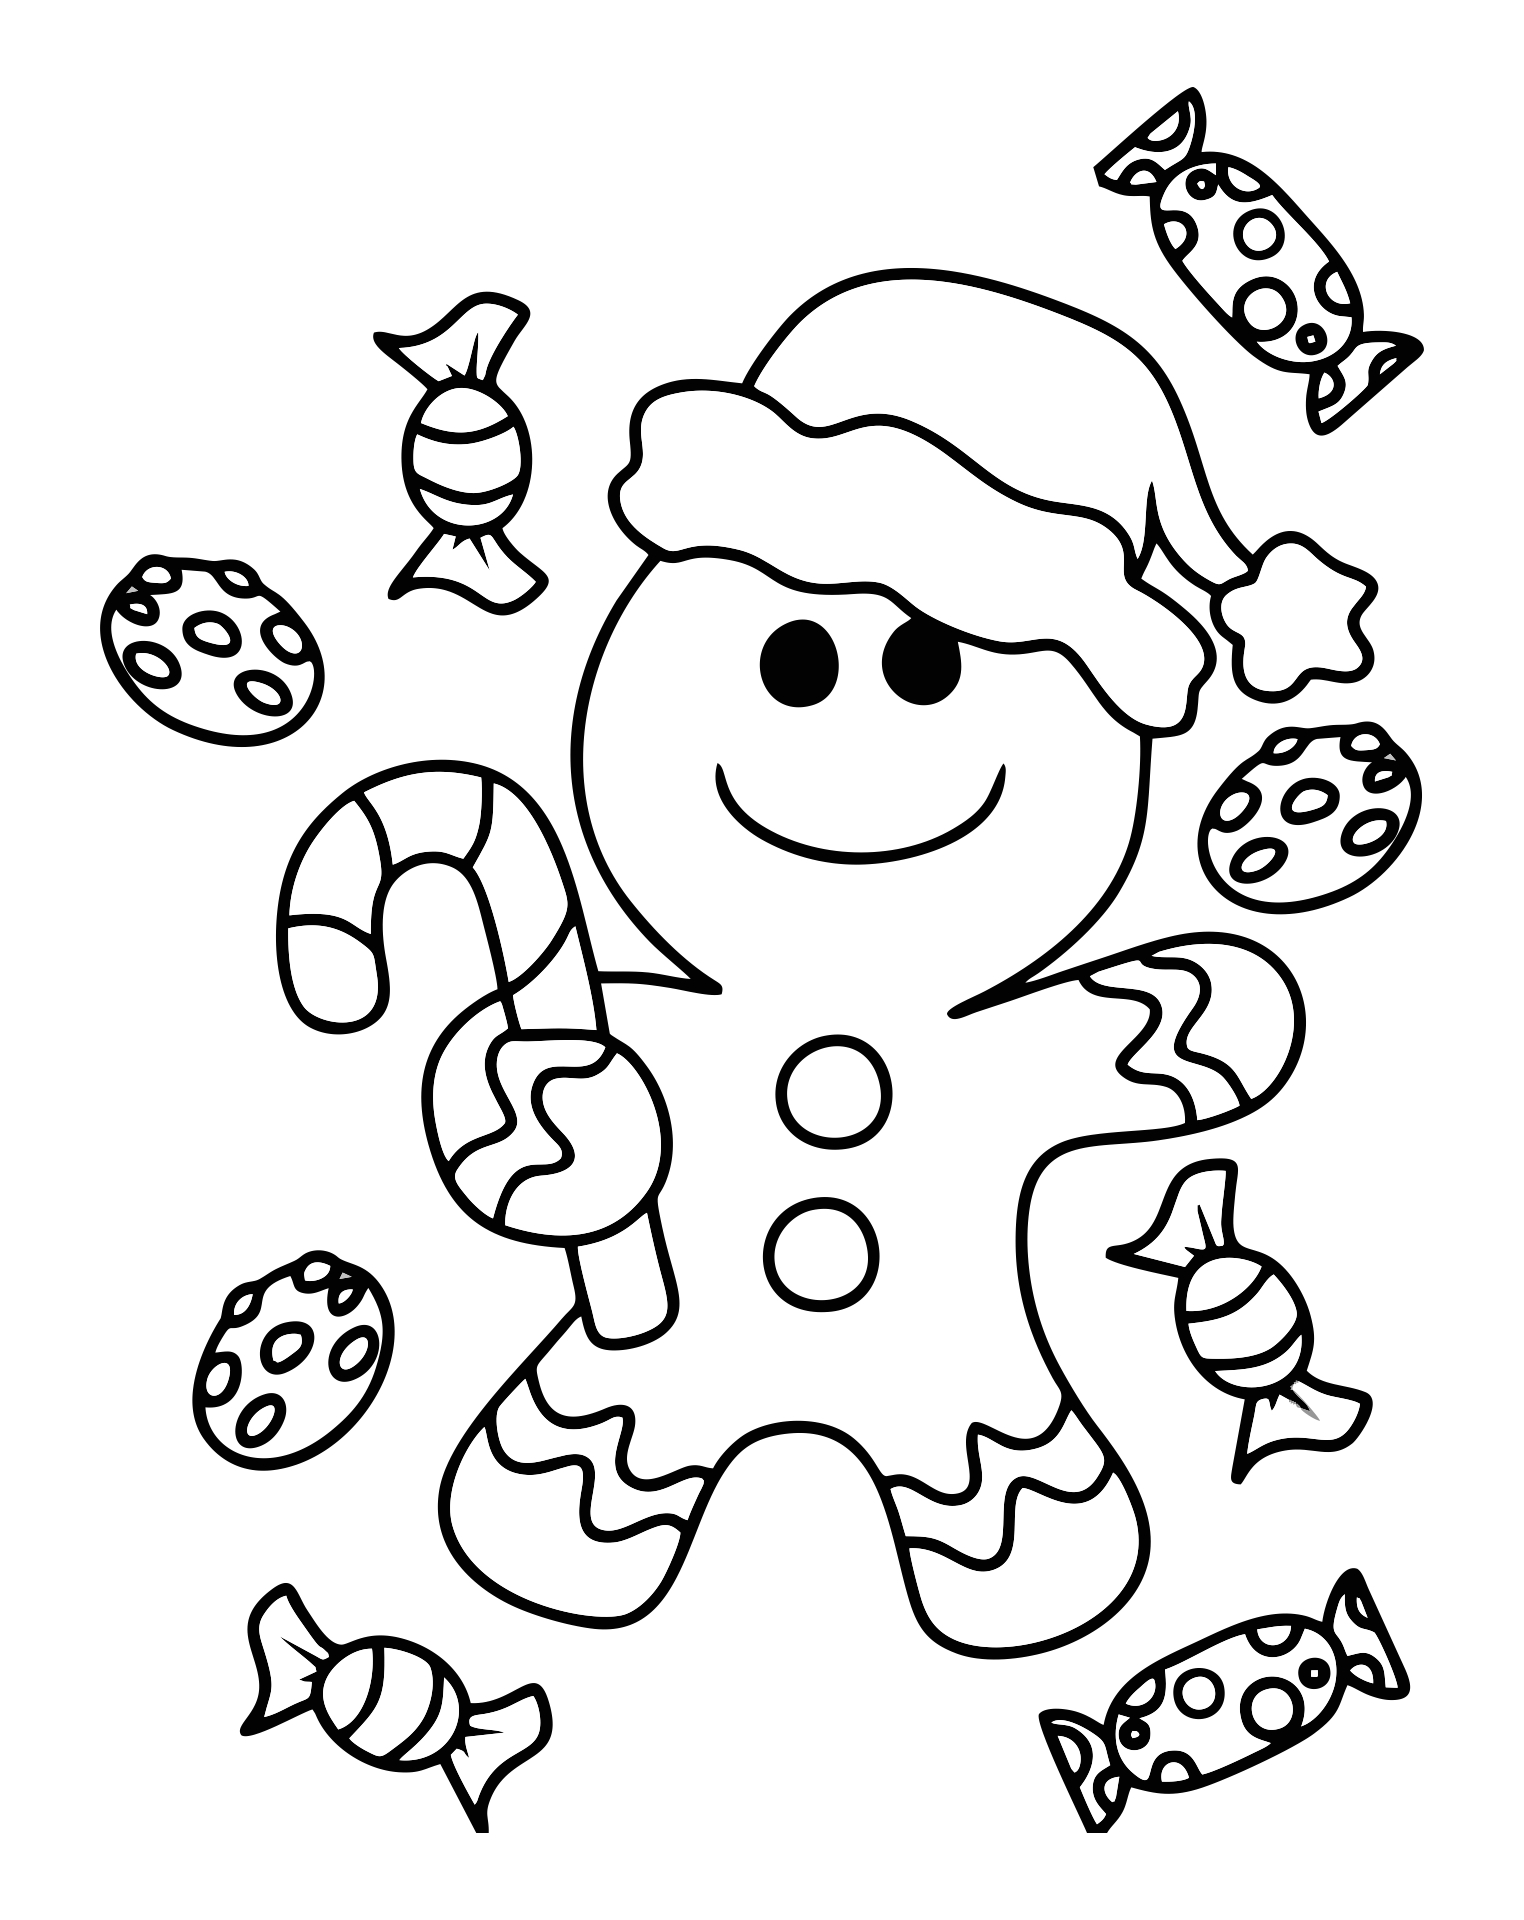 4 Best Images of Printable Christmas Crafts For Preschoolers